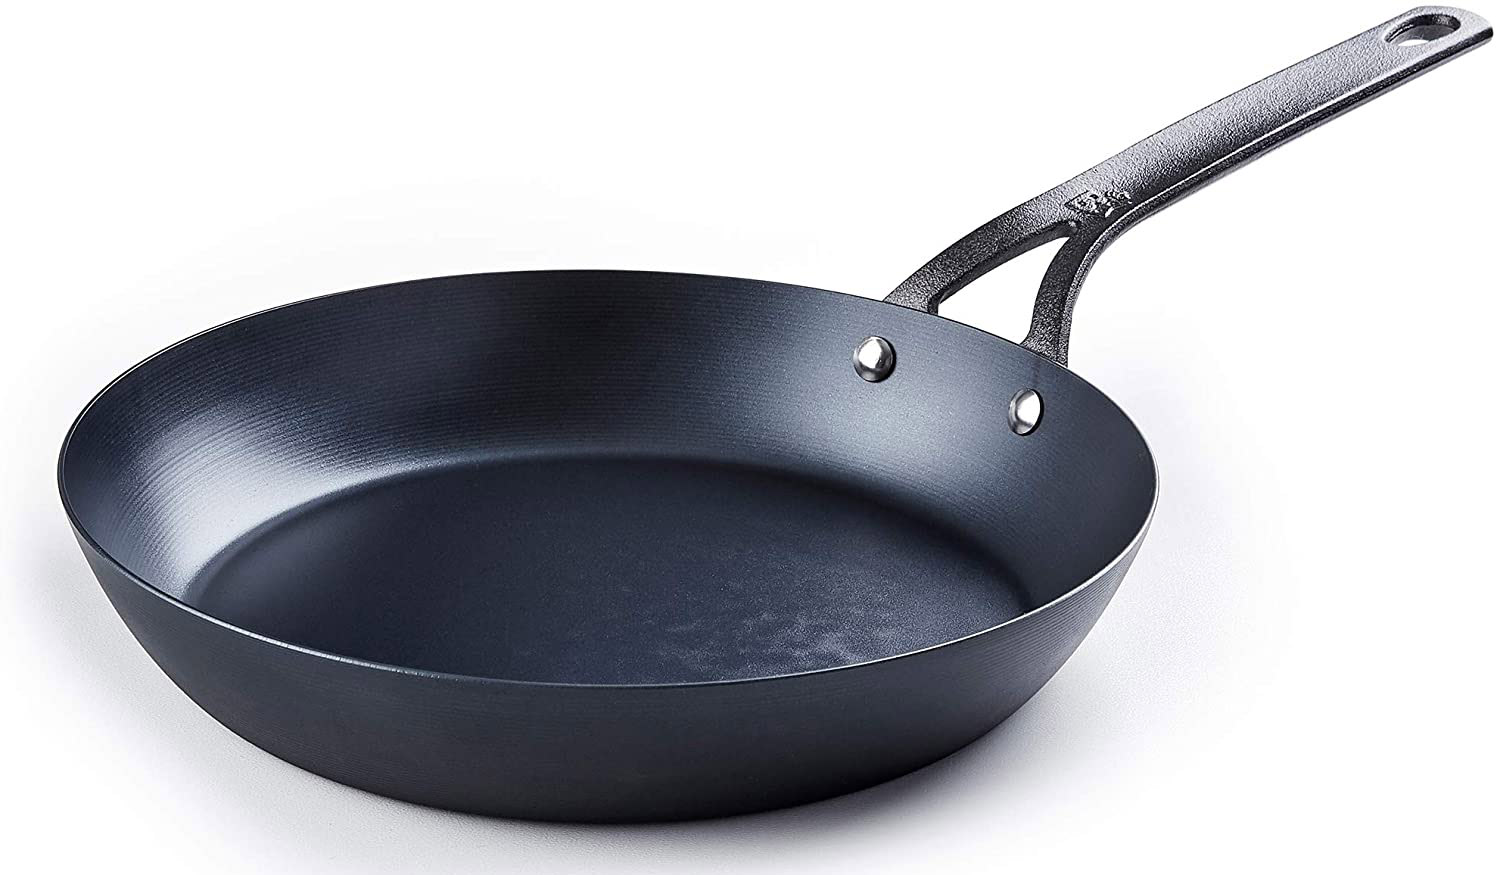 Stainless Steel Cookware Sets A Comprehensive Buying Guide